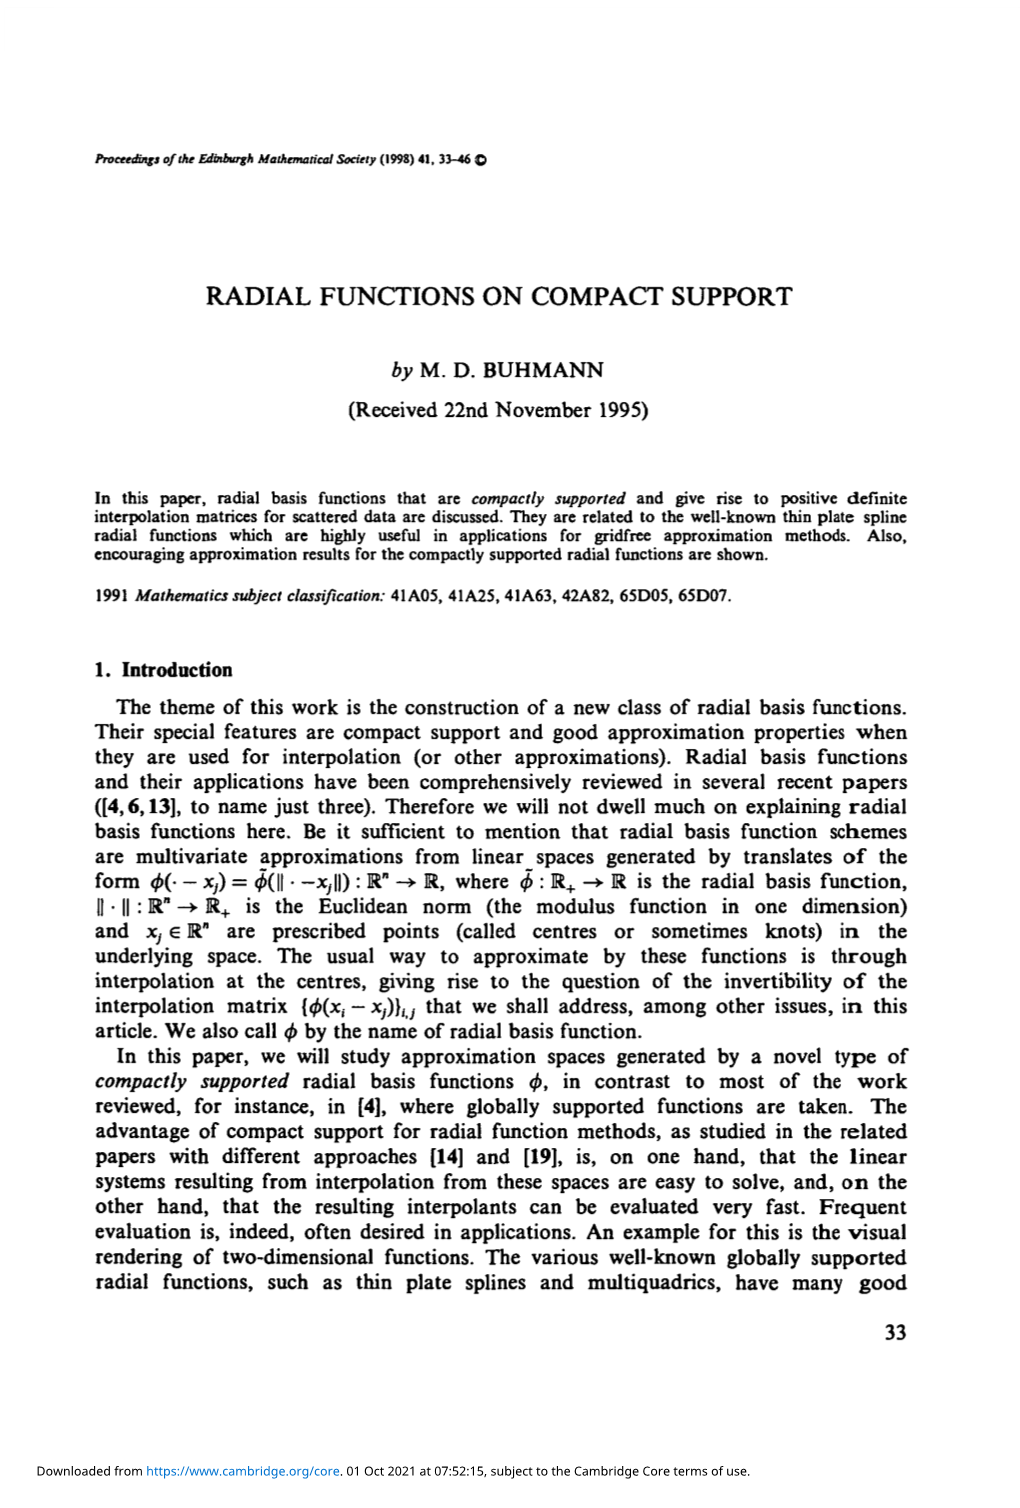 Radial Functions on Compact Support